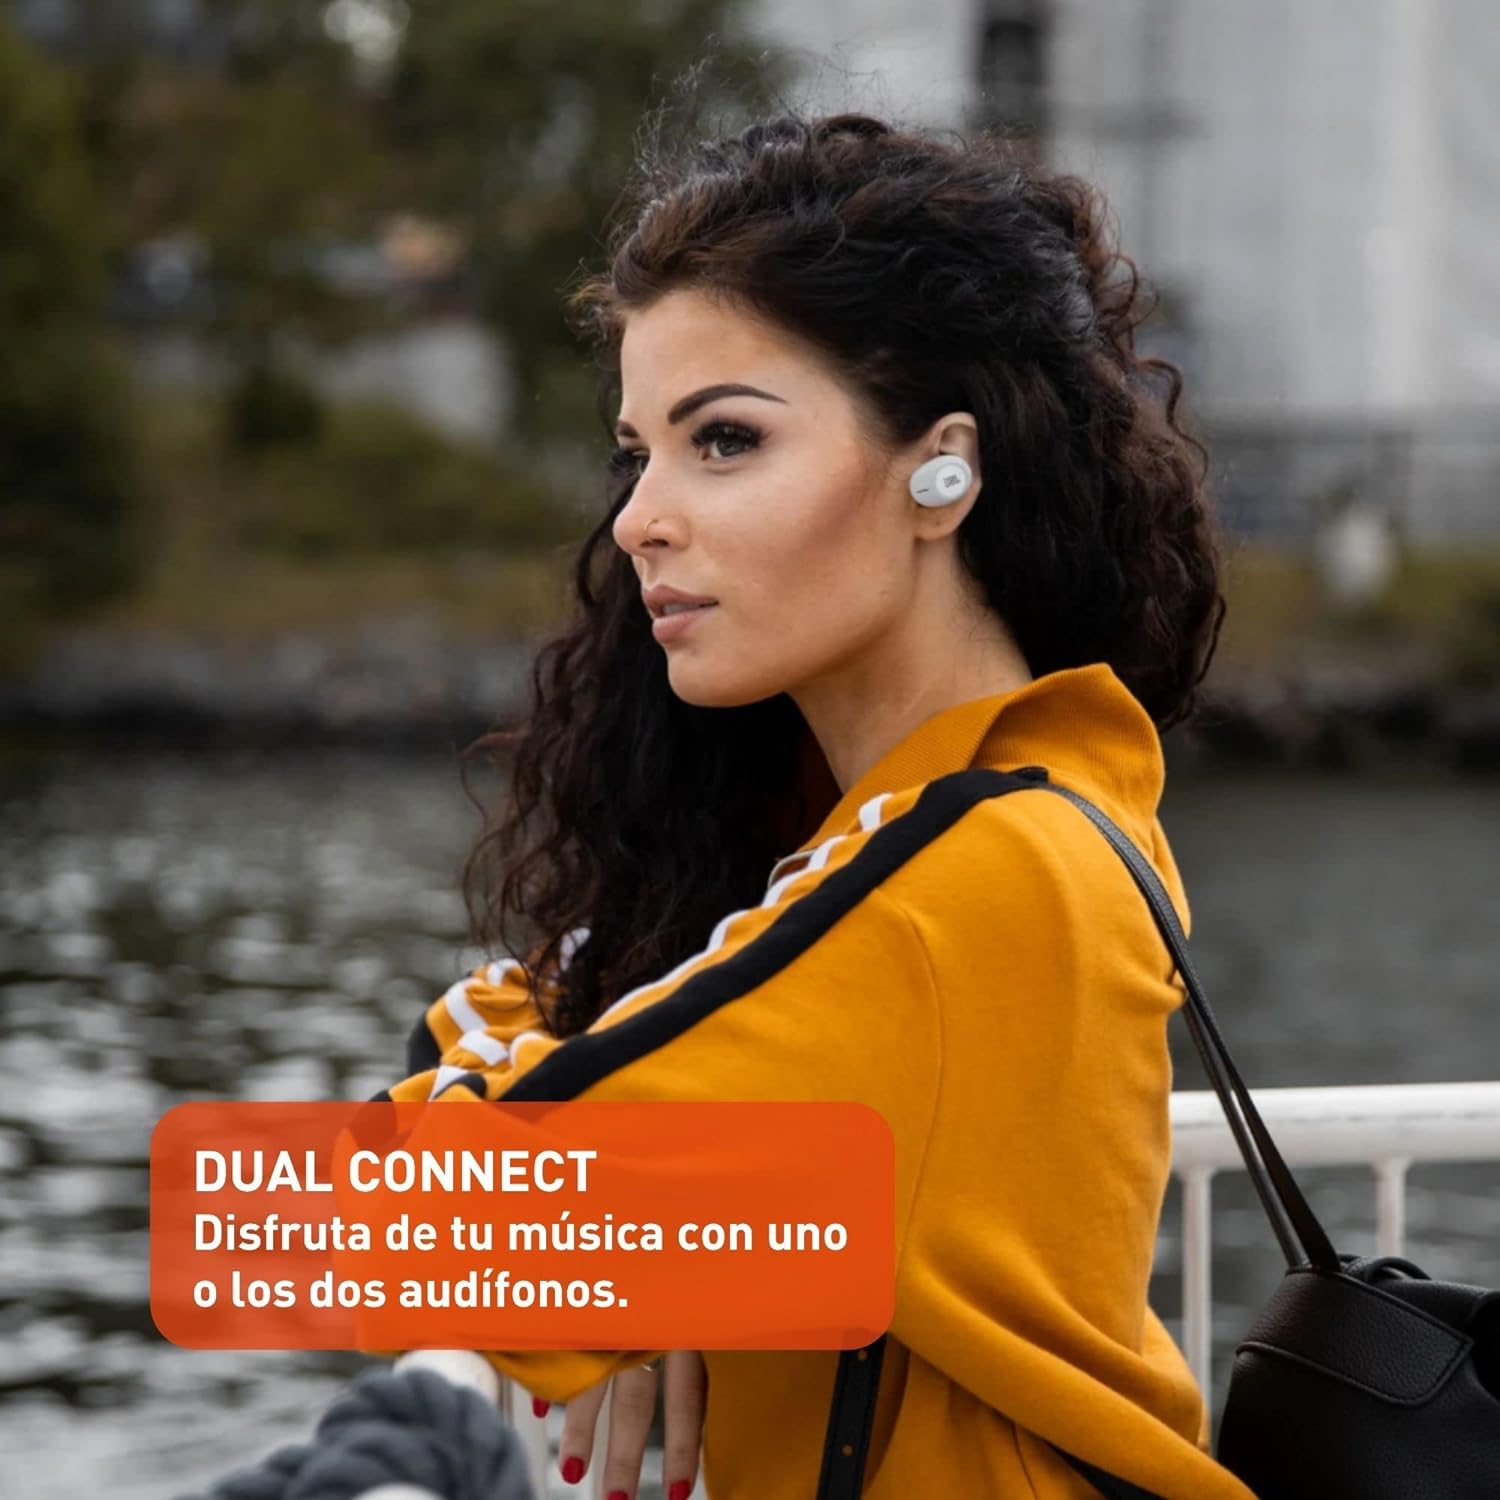 JBL Tune 125TWS True Wireless In-Ear Headphones - Pure Bass Sound, 32H Battery, Bluetooth, Fast Pair, Comfortable, Wireless Calls, Music, Native Voice Assistant (Black), Small